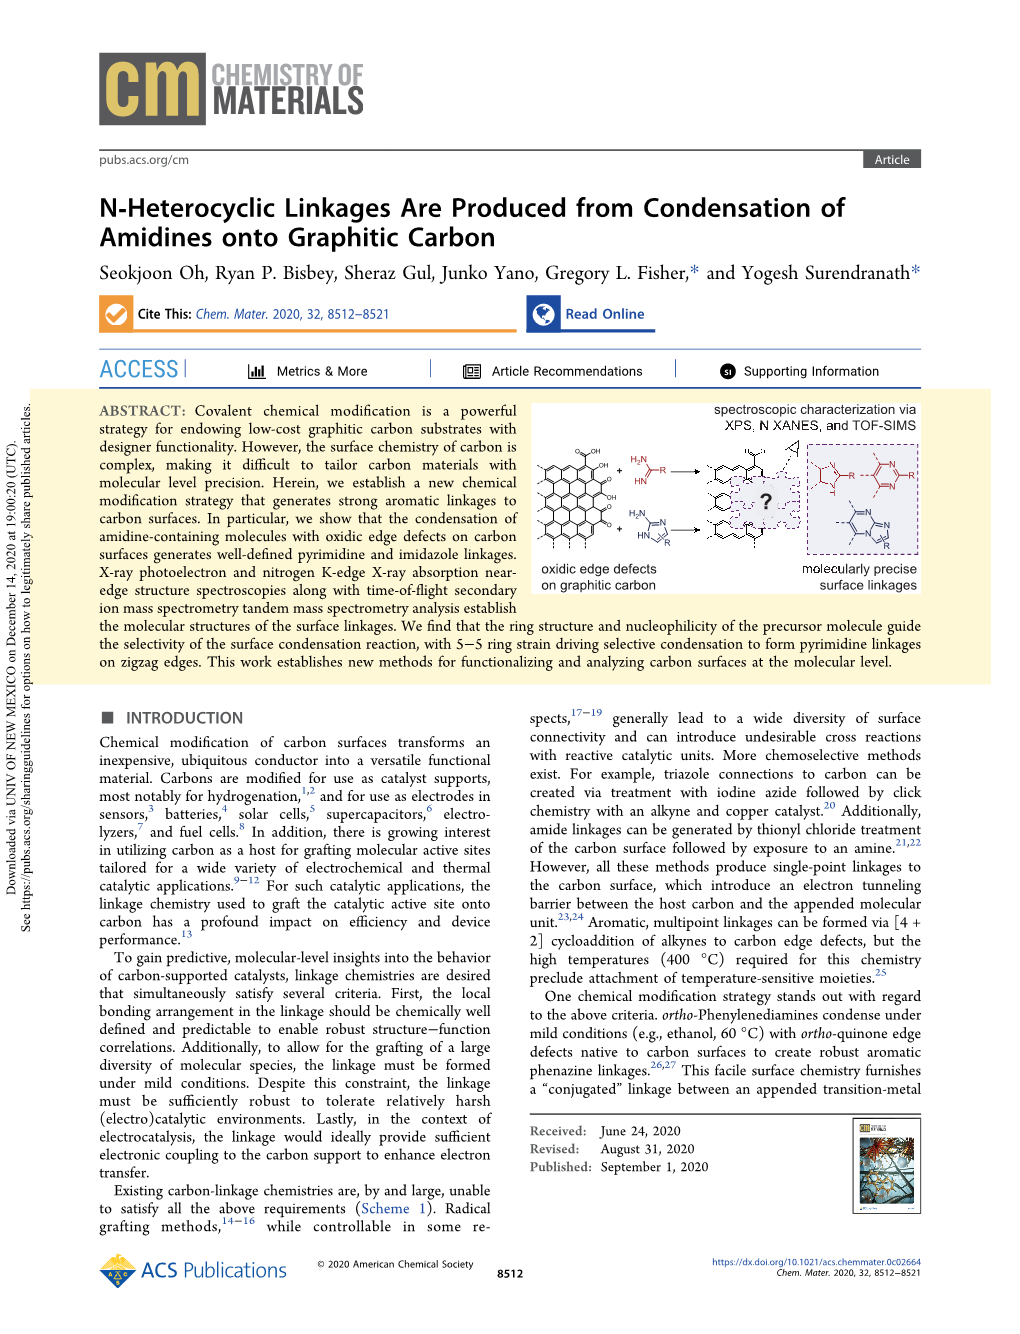 N-Heterocyclic Linkages Are Produced from Condensation of Amidines Onto Graphitic Carbon